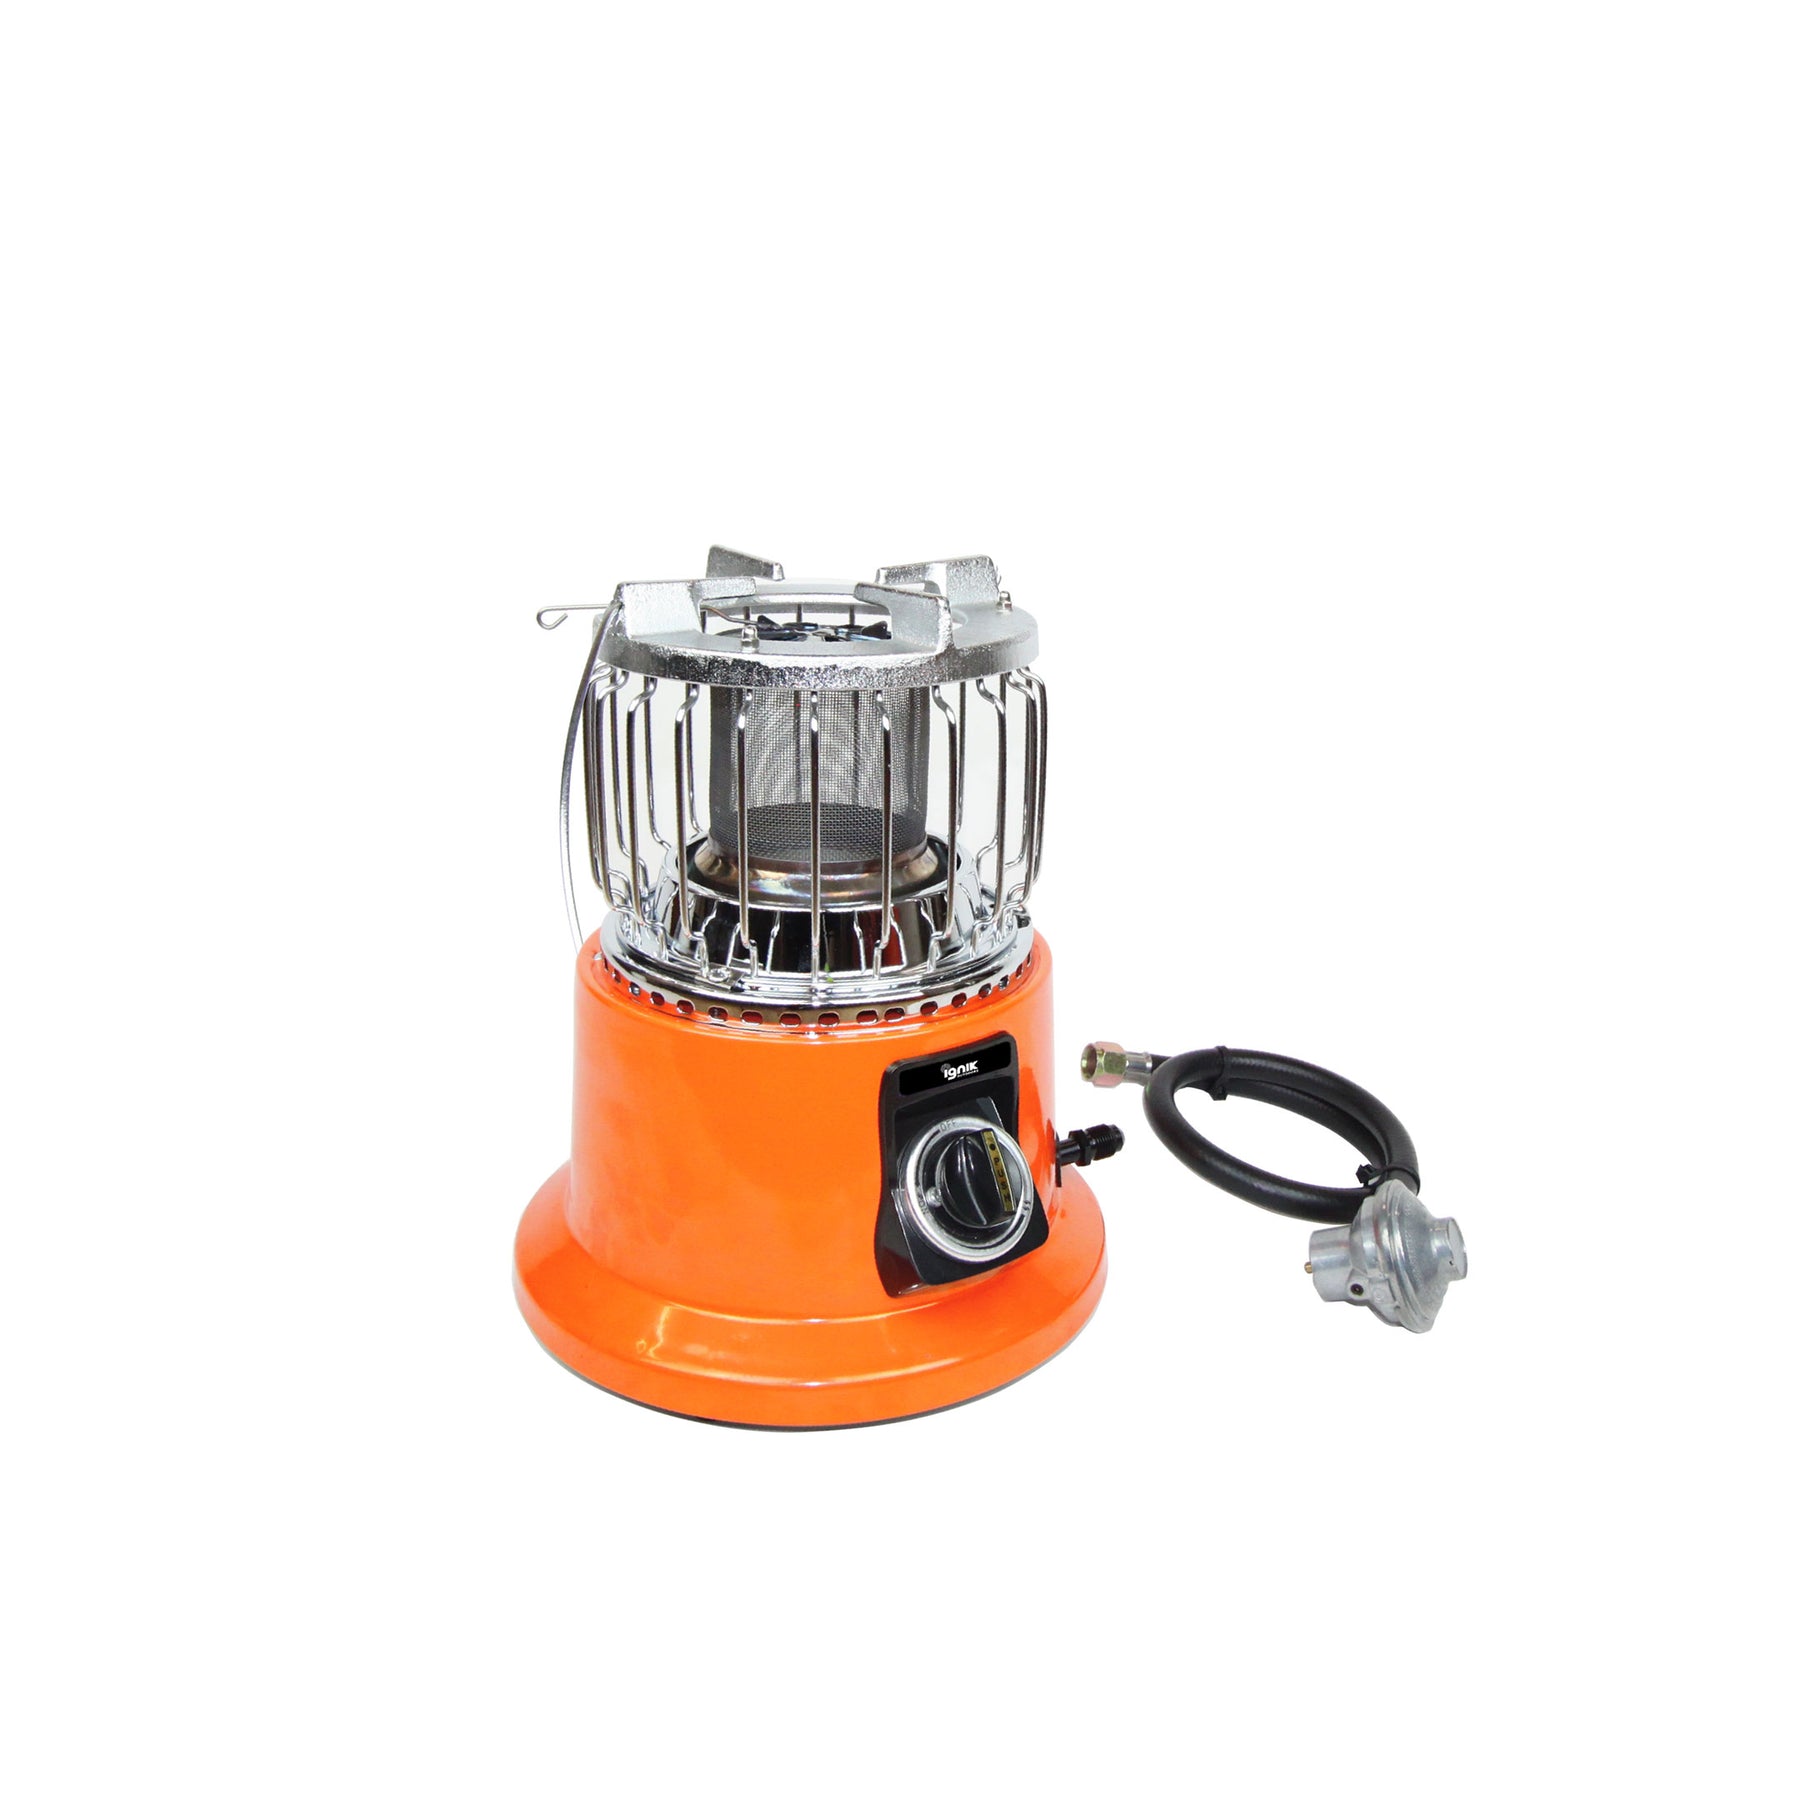 2-in-1 Heater-Stove – Outdoors